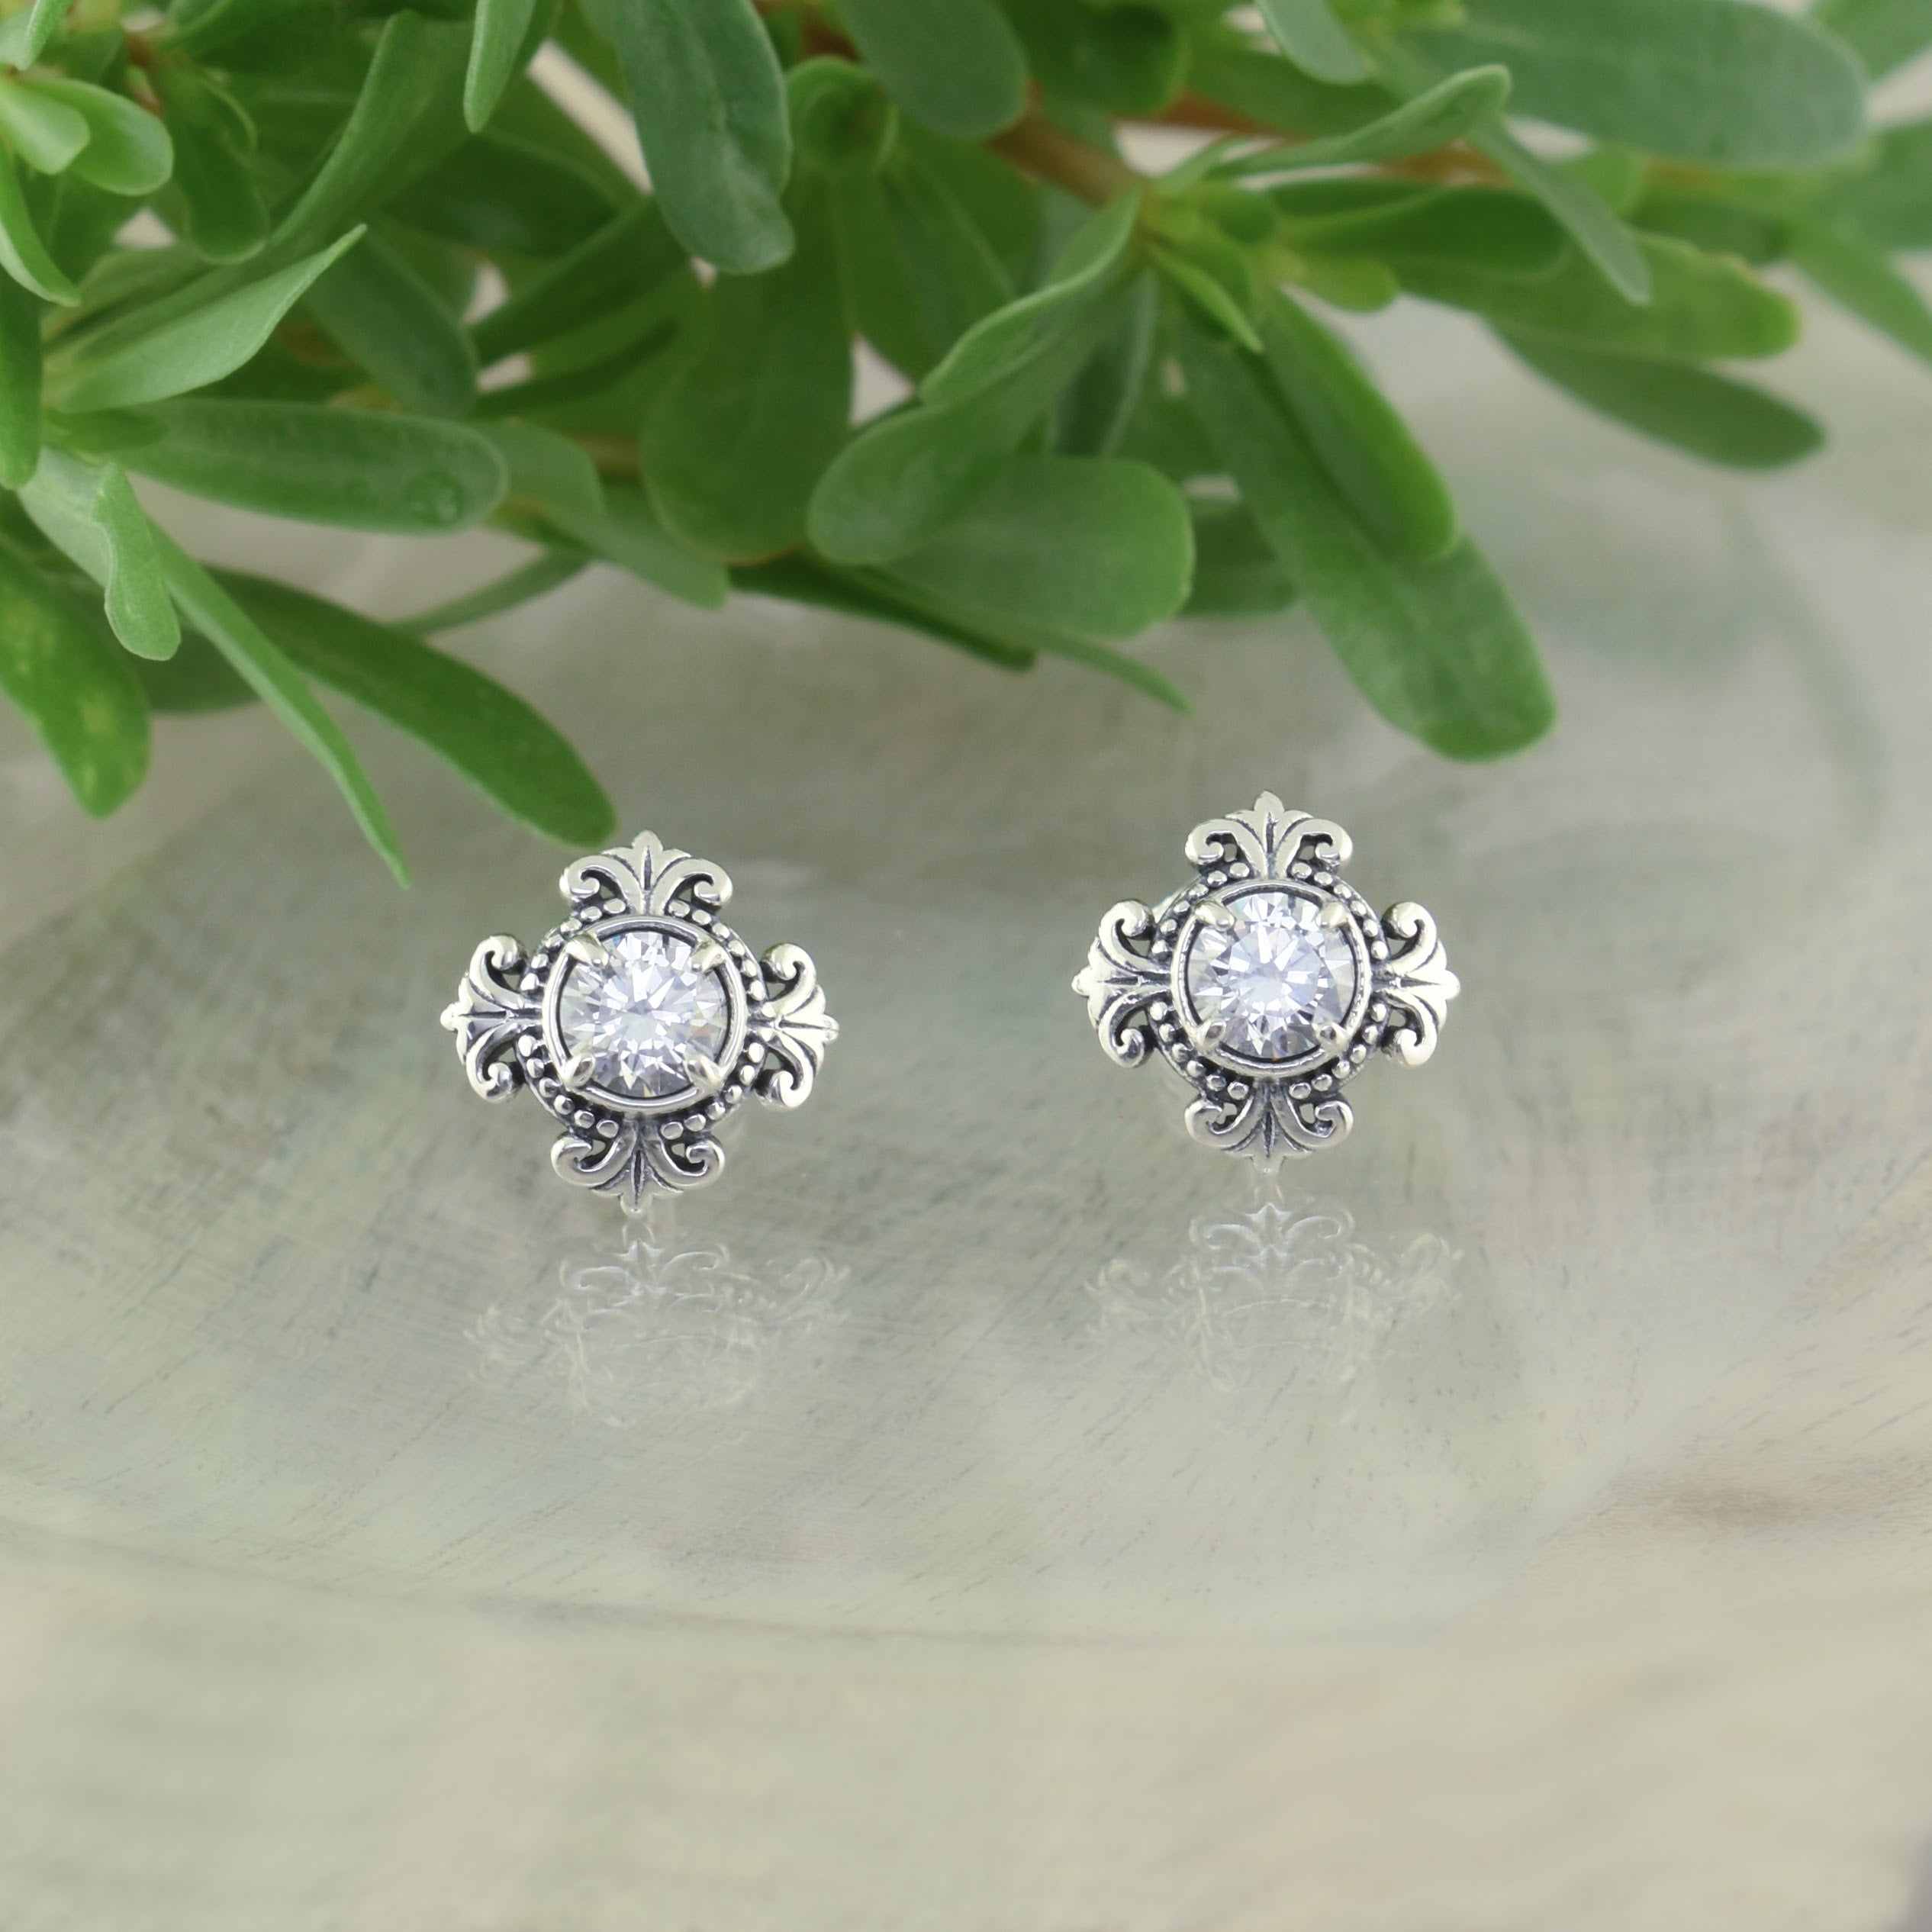 sterling silver earrings with cz and fleur-de-lis